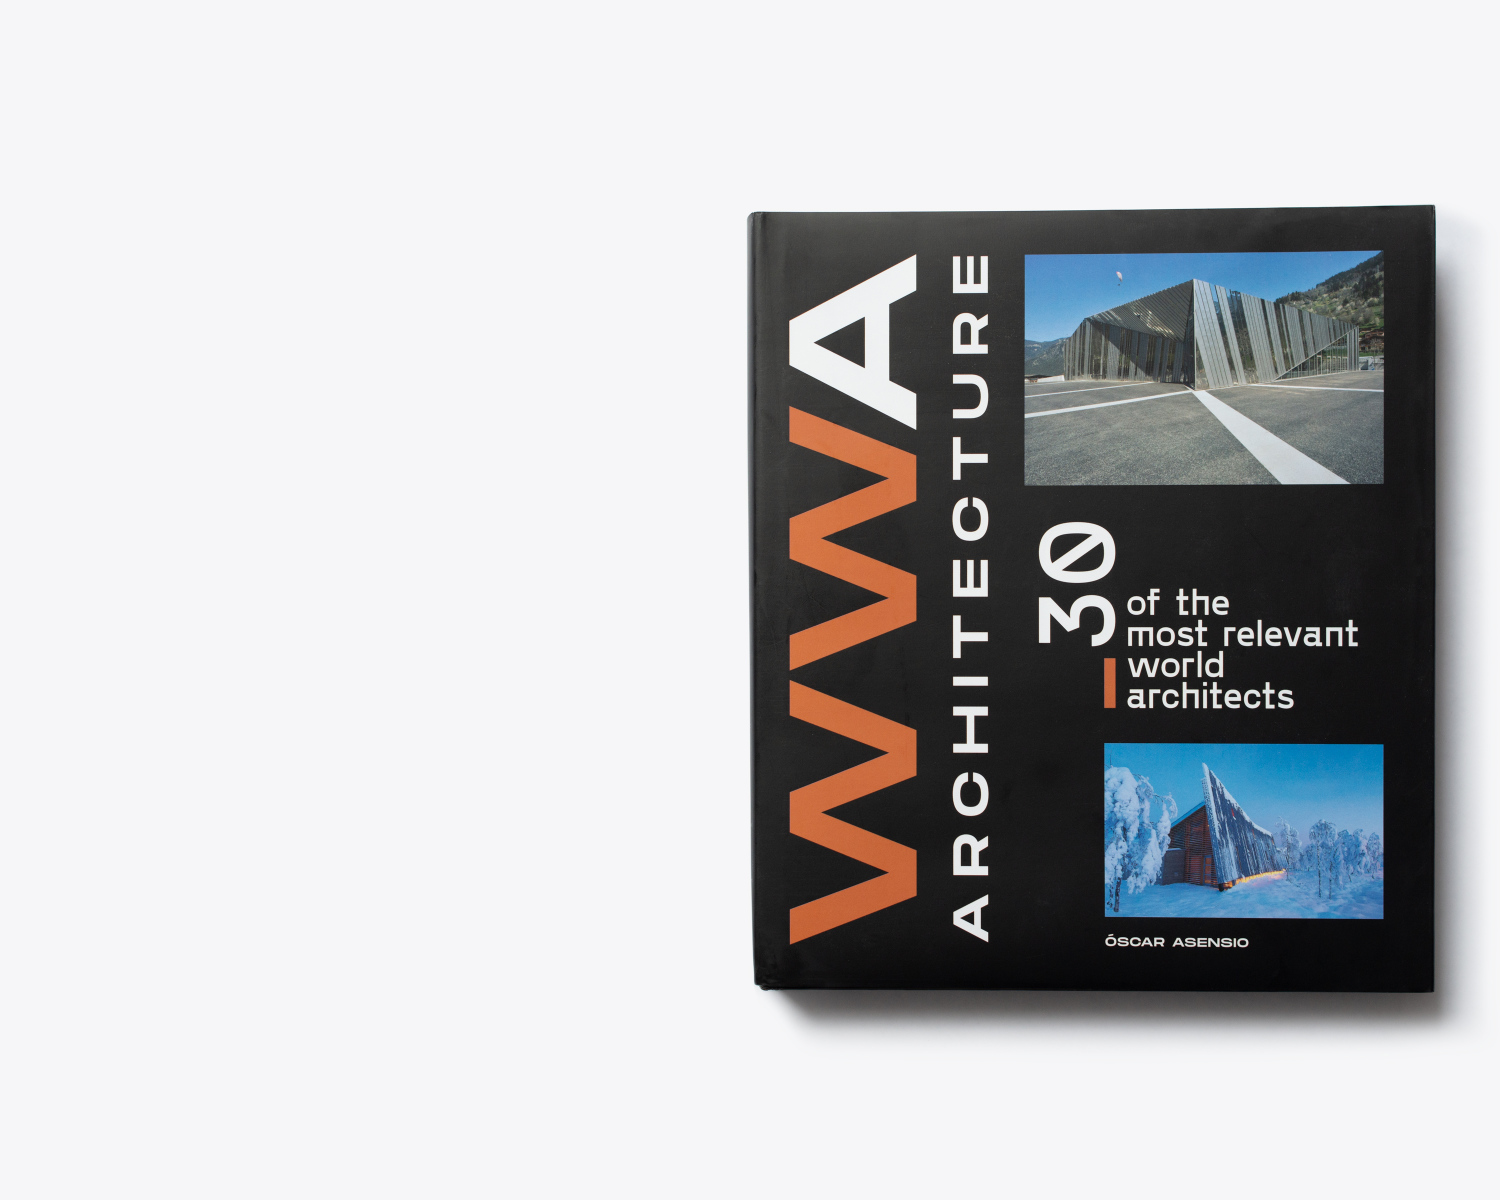 Birdseye Featured in “WWA Architecture – 30 of the most relevant world architects” Book